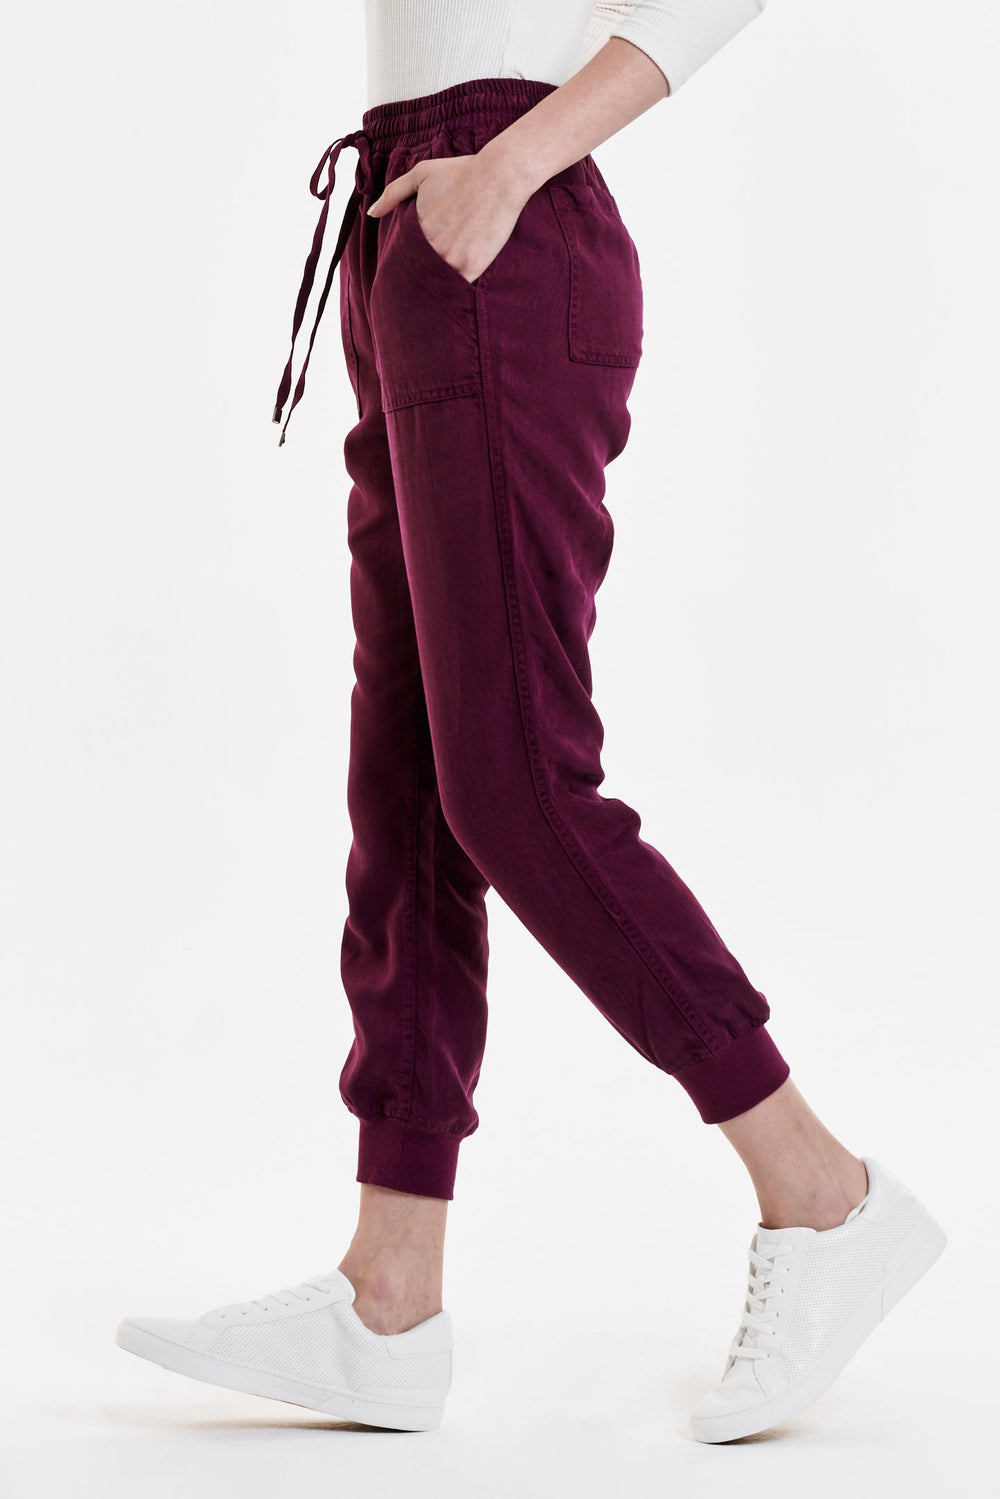 image of a female model wearing a JACEY SUPER HIGH RISE CROPPED JOGGER PANTS PURPLE POTION PANTS